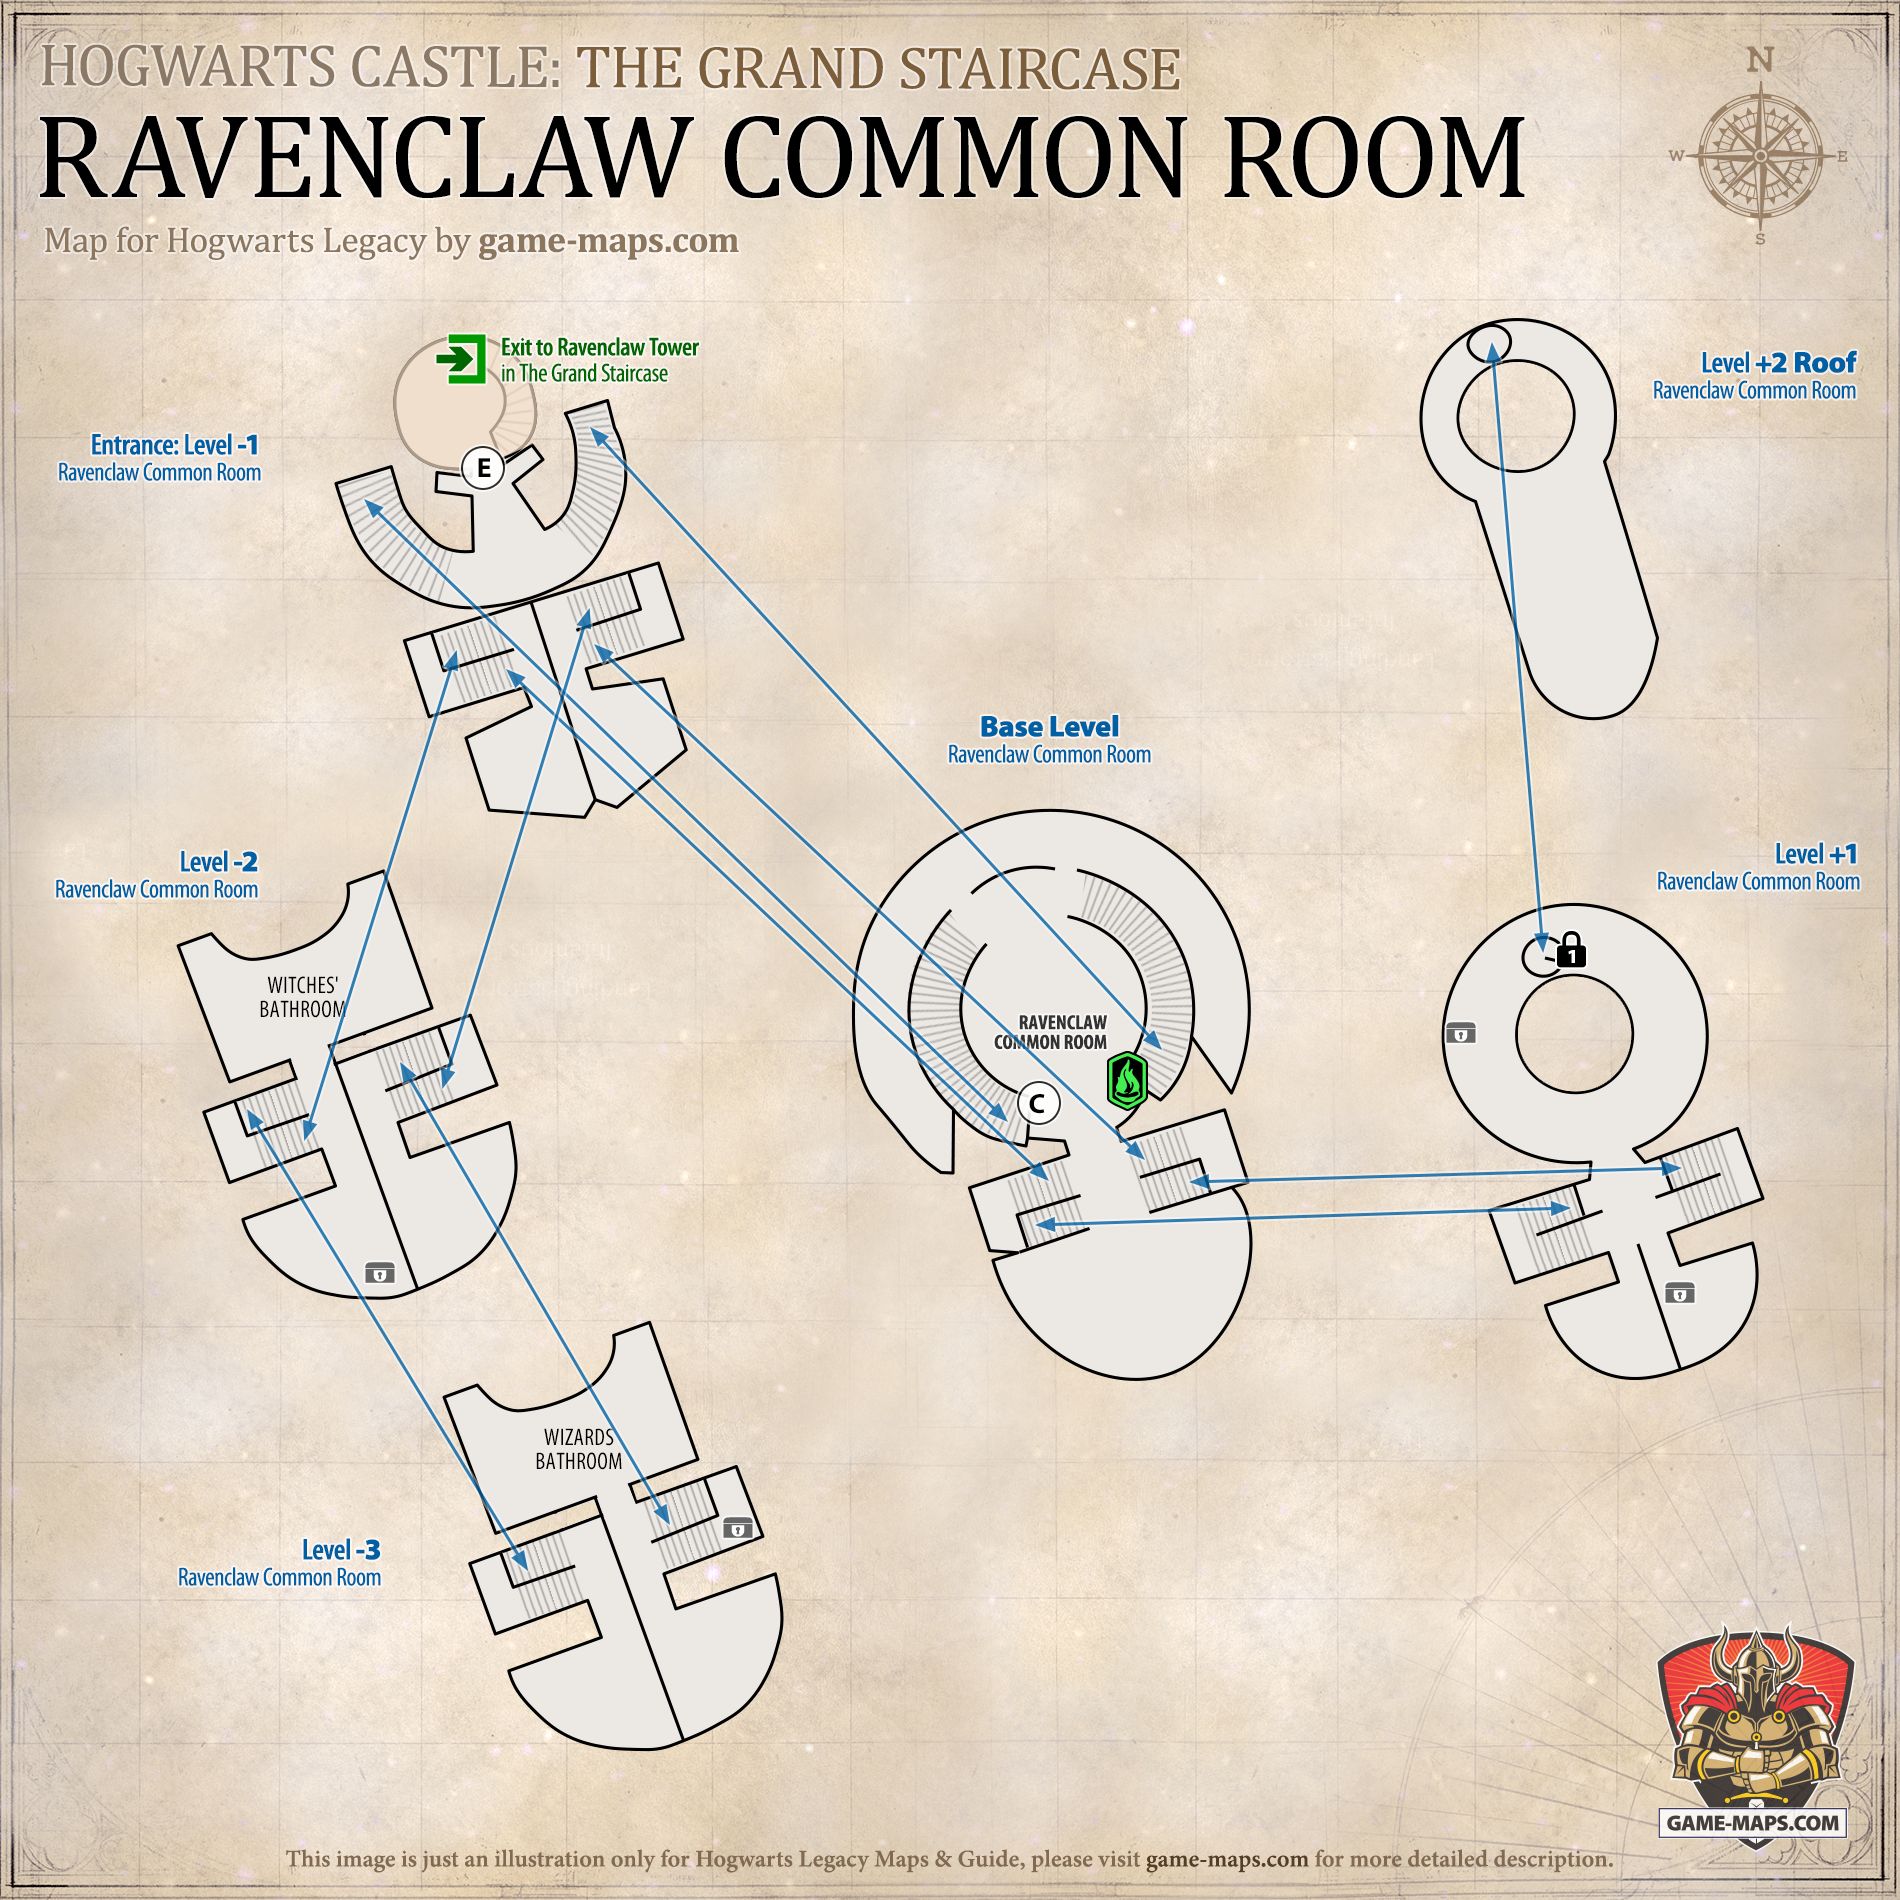 Ravenclaw Common Room Map for Hogwarts Legacy